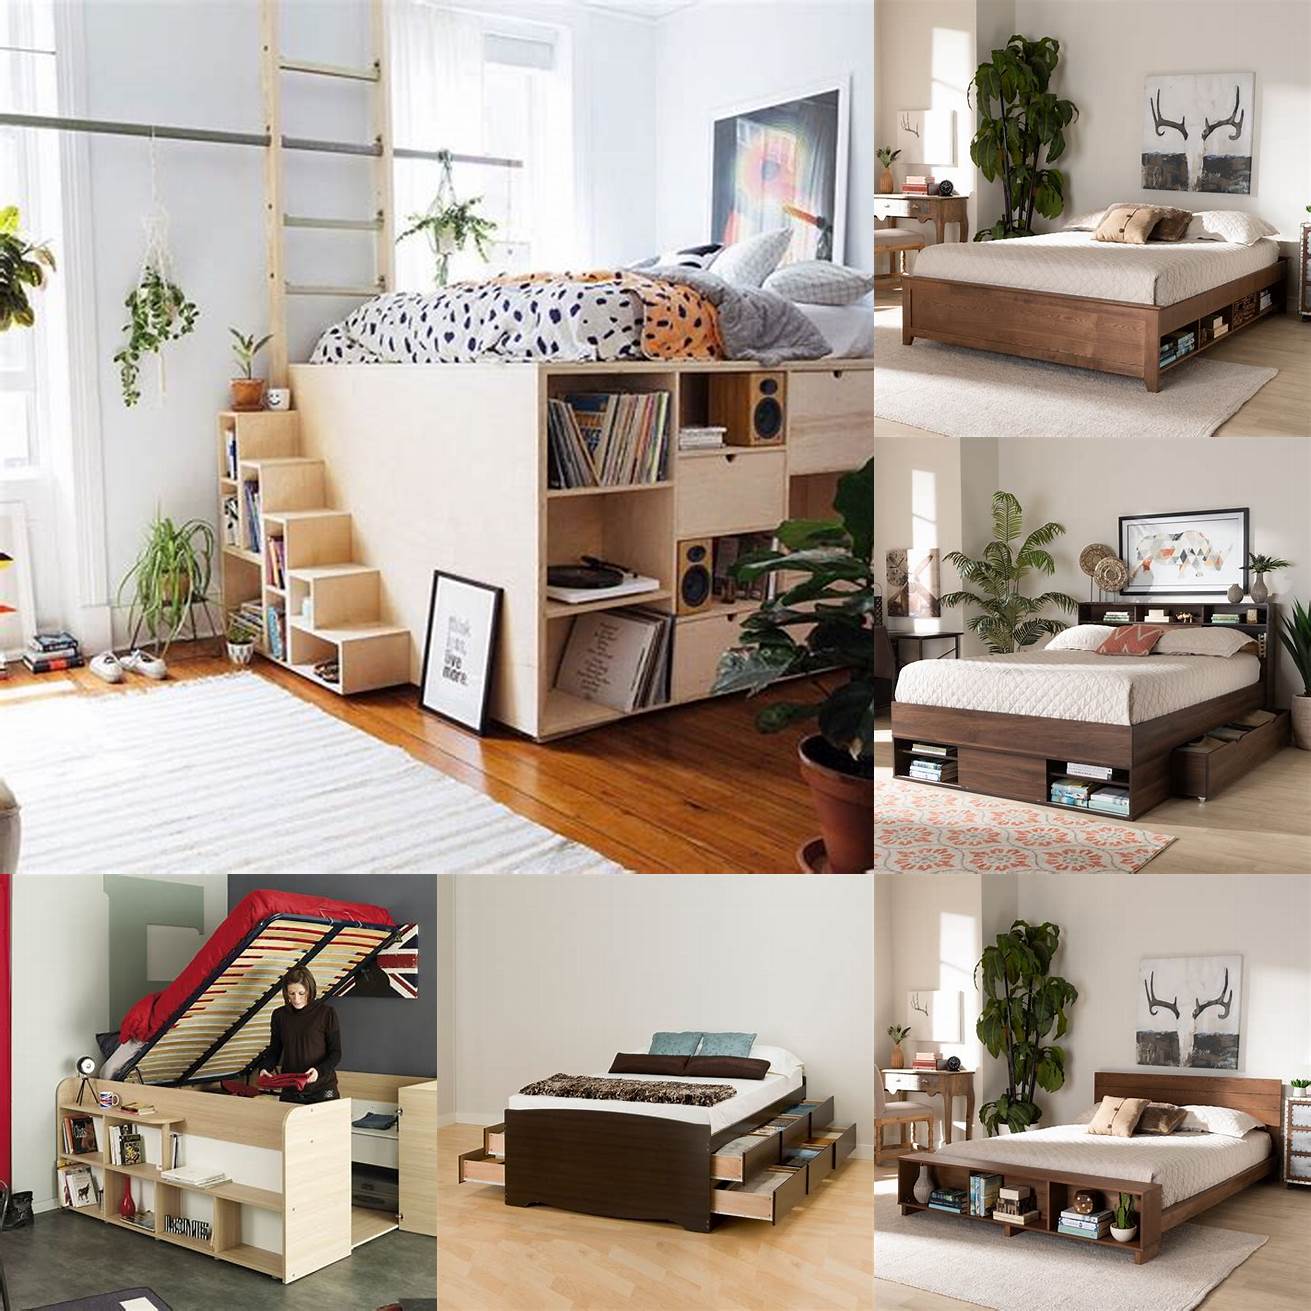 Image of a high platform bed with built-in storage